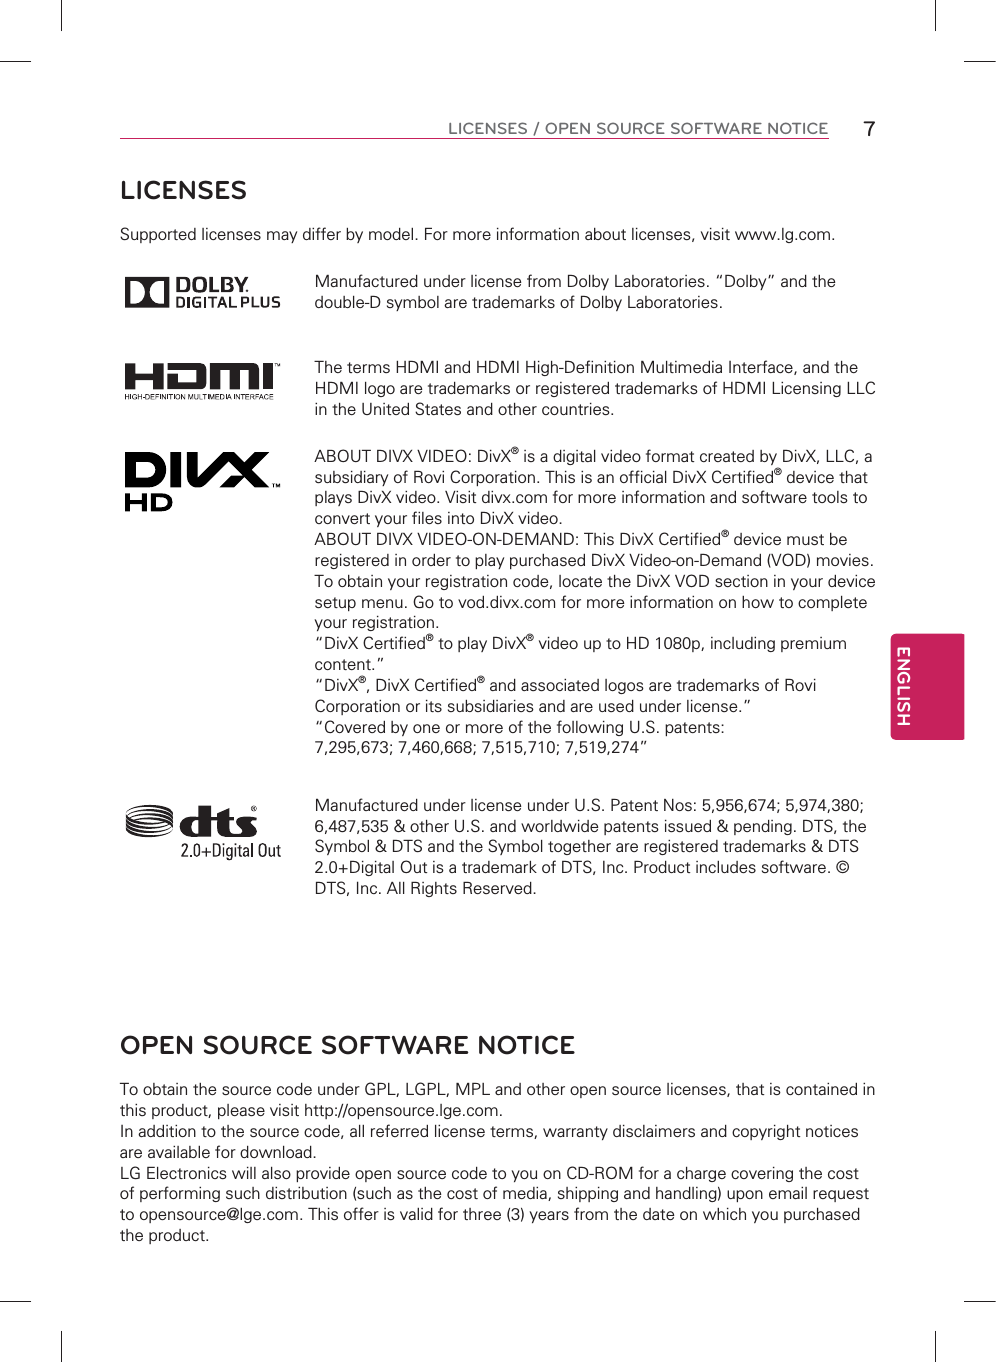 ENGLISH7LICENSES / OPEN SOURCE SOFTWARE NOTICELICENSESSupported licenses may differ by model. For more information about licenses, visit www.lg.com.Manufactured under license from Dolby Laboratories. “Dolby” and the double-D symbol are trademarks of Dolby Laboratories.The terms HDMI and HDMI High-Definition Multimedia Interface, and the HDMI logo are trademarks or registered trademarks of HDMI Licensing LLC in the United States and other countries.ABOUT DIVX VIDEO: DivX® is a digital video format created by DivX, LLC, a subsidiary of Rovi Corporation. This is an official DivX Certified® device that plays DivX video. Visit divx.com for more information and software tools to convert your files into DivX video.ABOUT DIVX VIDEO-ON-DEMAND: This DivX Certified® device must be registered in order to play purchased DivX Video-on-Demand (VOD) movies. To obtain your registration code, locate the DivX VOD section in your device setup menu. Go to vod.divx.com for more information on how to complete your registration. “DivX Certified® to play DivX® video up to HD 1080p, including premium content.”“DivX®, DivX Certified® and associated logos are trademarks of Rovi Corporation or its subsidiaries and are used under license.”“Covered by one or more of the following U.S. patents: 7,295,673; 7,460,668; 7,515,710; 7,519,274”Manufactured under license under U.S. Patent Nos: 5,956,674; 5,974,380; 6,487,535 &amp; other U.S. and worldwide patents issued &amp; pending. DTS, the Symbol &amp; DTS and the Symbol together are registered trademarks &amp; DTS 2.0+Digital Out is a trademark of DTS, Inc. Product includes software. © DTS, Inc. All Rights Reserved.OPEN SOURCE SOFTWARE NOTICETo obtain the source code under GPL, LGPL, MPL and other open source licenses, that is contained in this product, please visit http://opensource.lge.com.In addition to the source code, all referred license terms, warranty disclaimers and copyright notices are available for download.LG Electronics will also provide open source code to you on CD-ROM for a charge covering the cost of performing such distribution (such as the cost of media, shipping and handling) upon email request to opensource@lge.com. This offer is valid for three (3) years from the date on which you purchased the product.